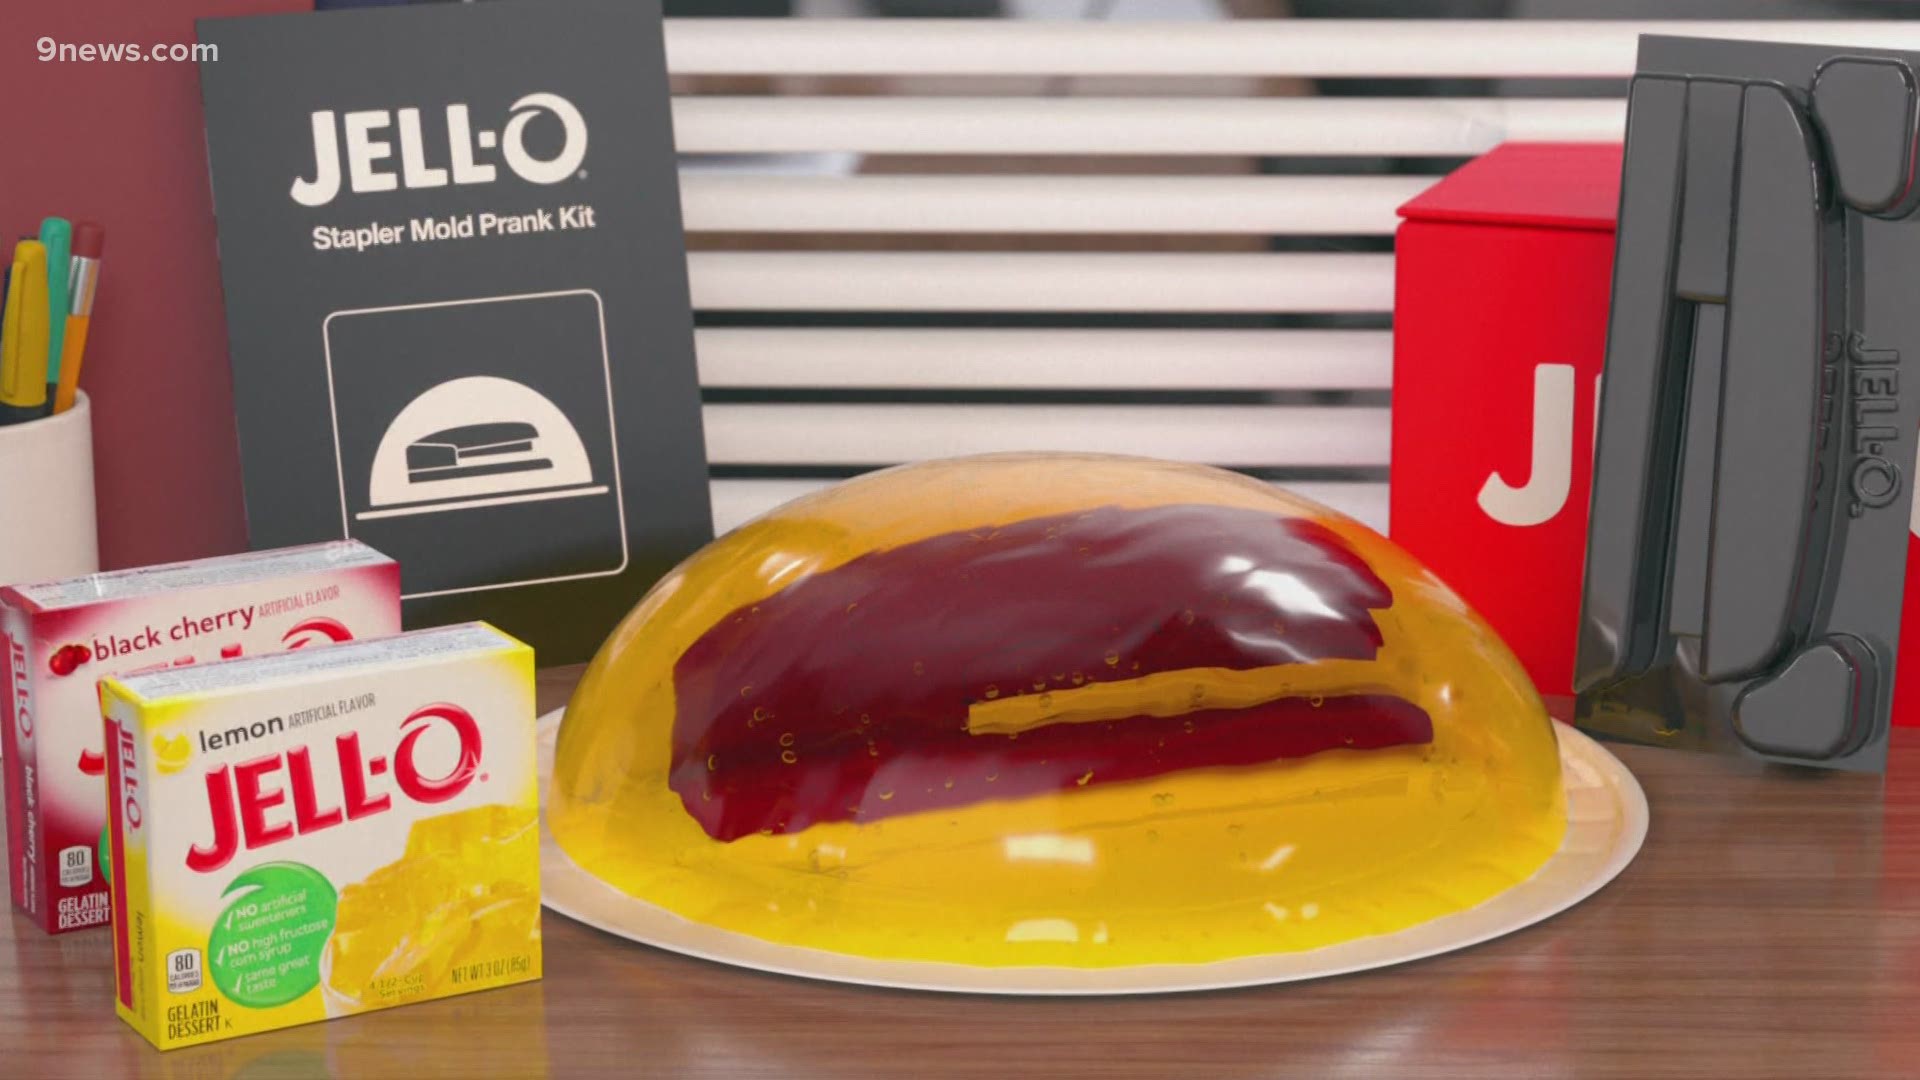 In other news, there will be no Zooming into the Oscars, the Video Game Hall of Fame nominees have been announced and Jell-O helps you recreate a classic TV moment.